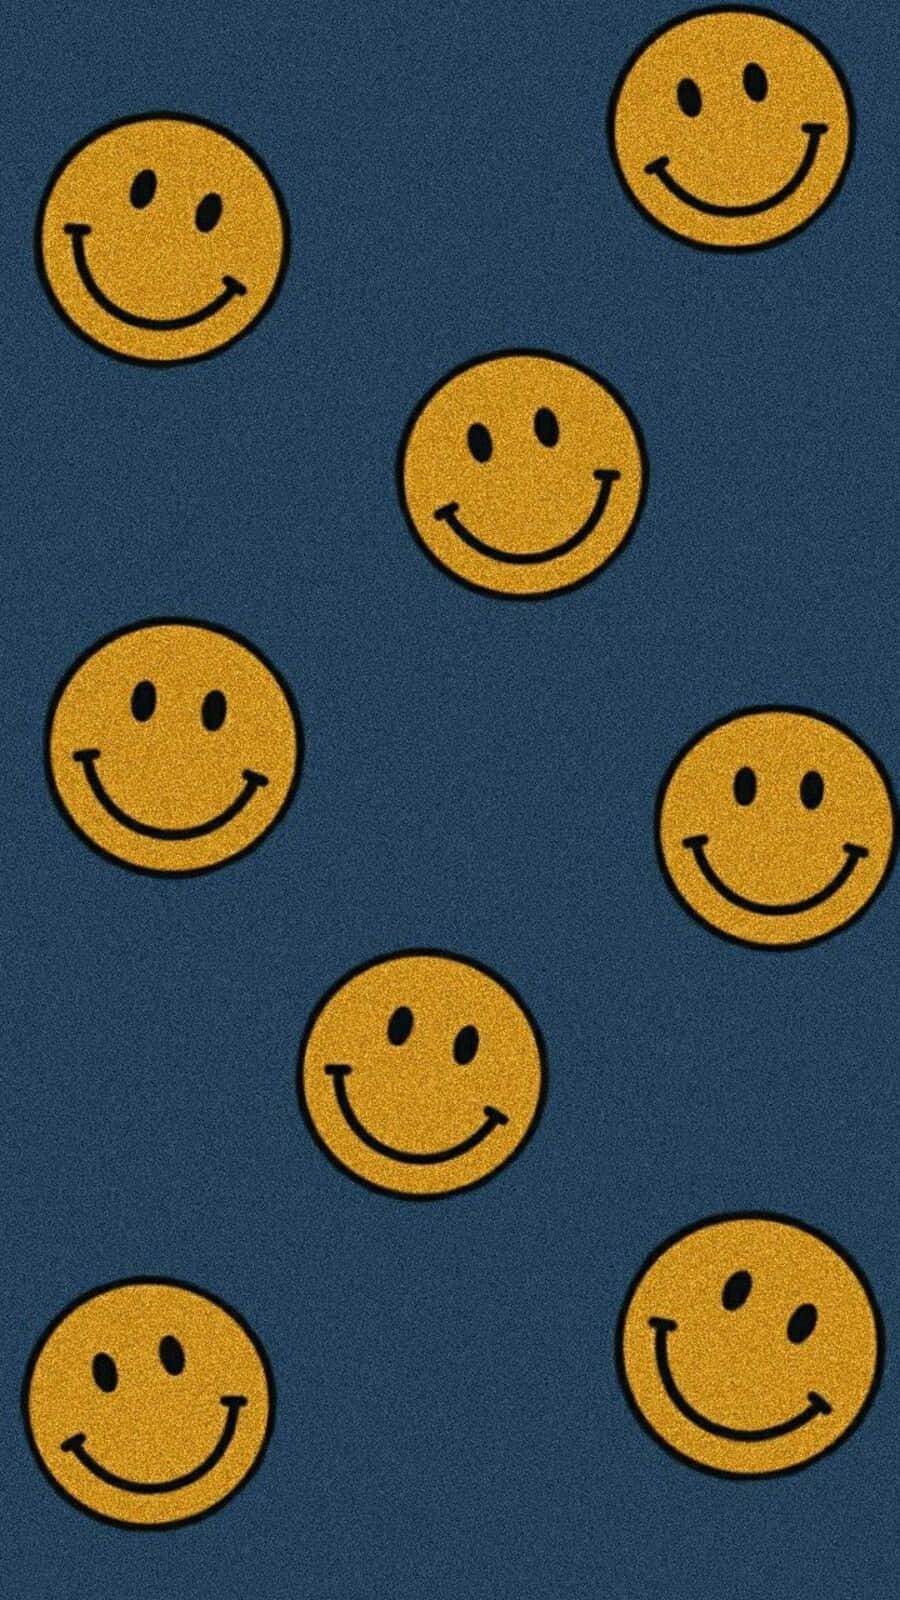 Download Aesthetic Smiley Face Wallpaper